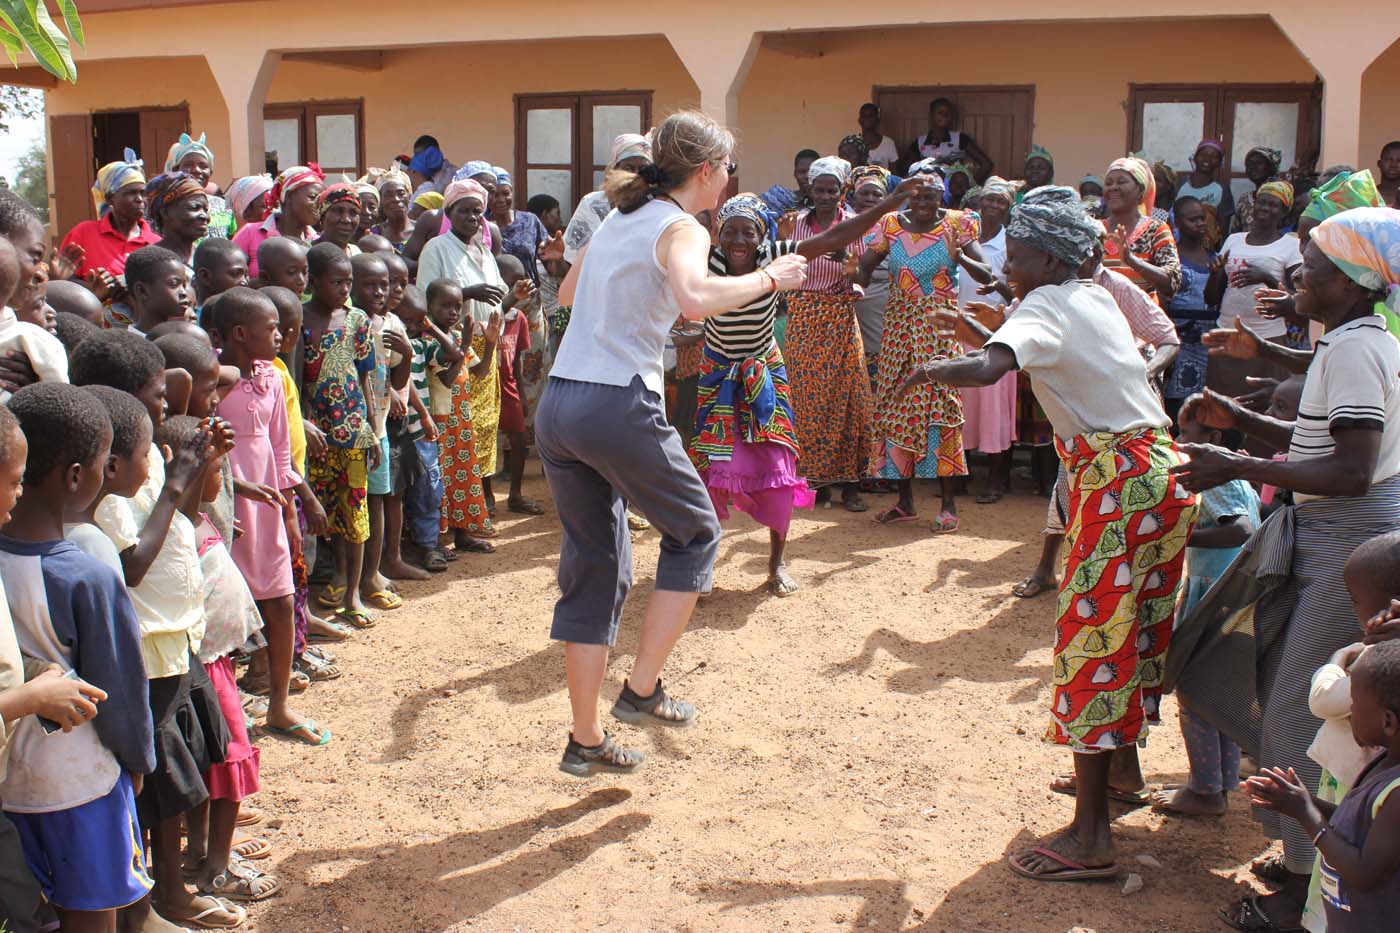 Susan dancing with the weavers